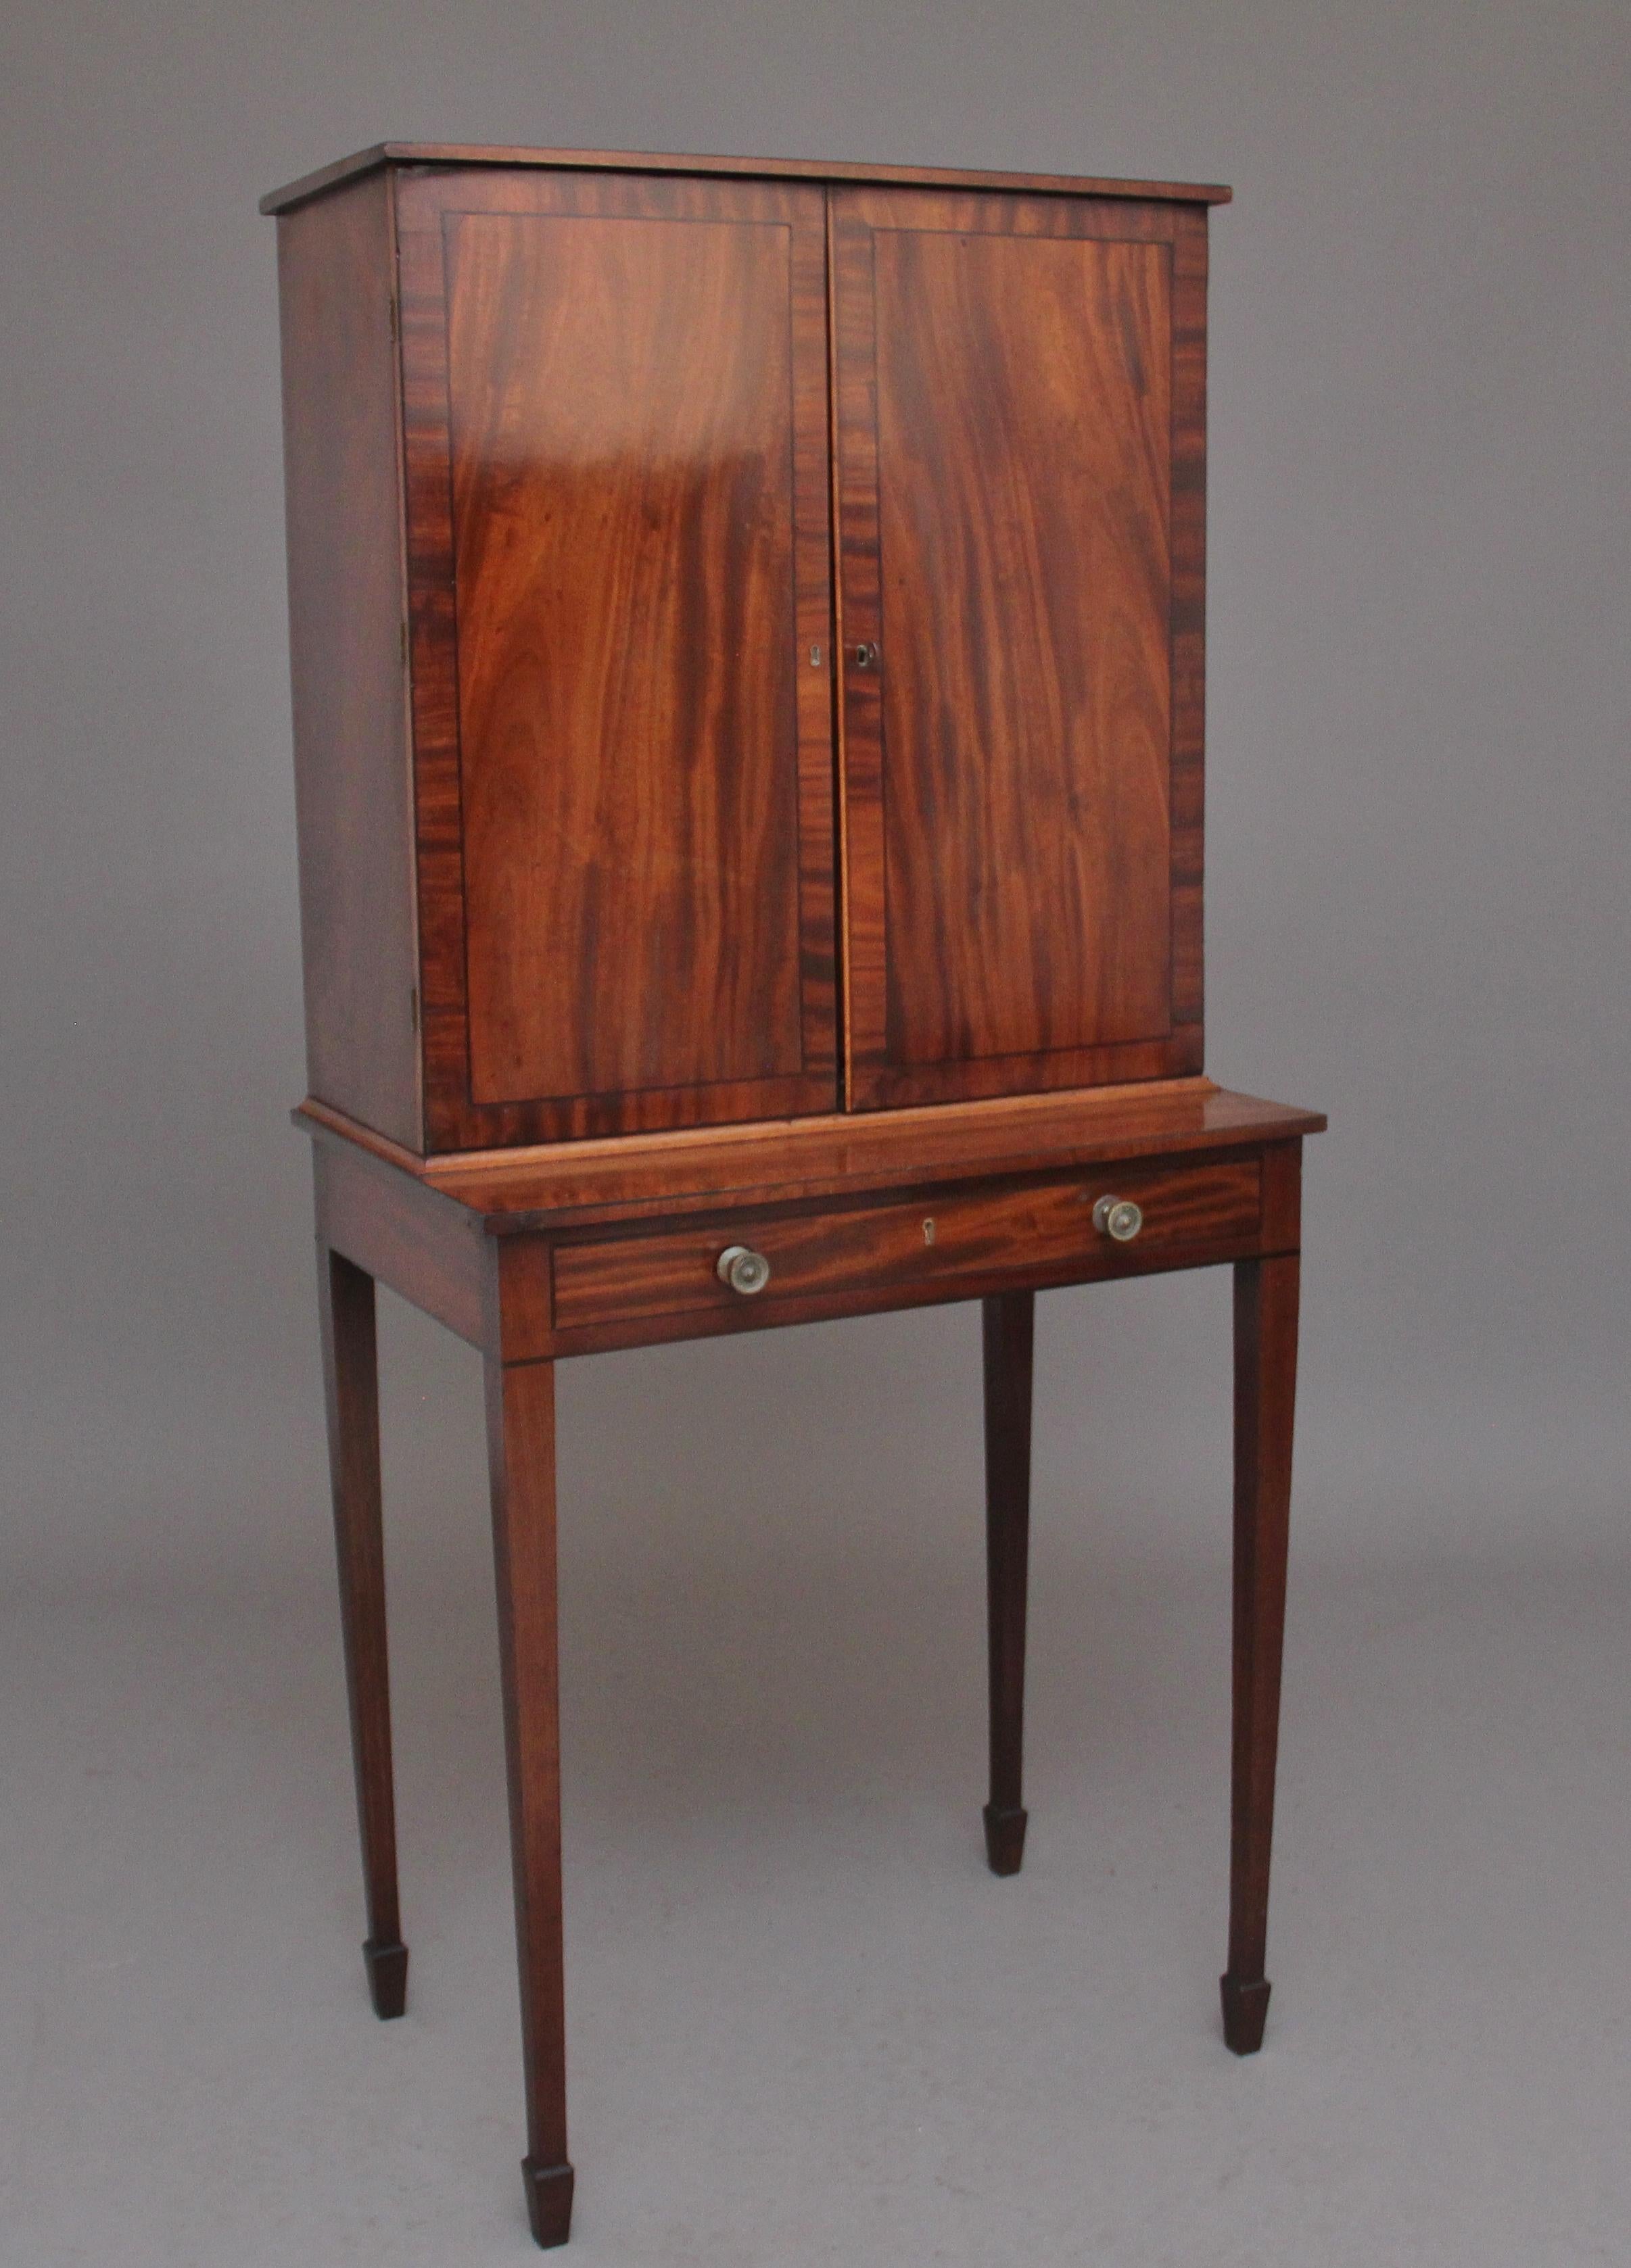 19th Century Mahogany Collectors Cabinet In Good Condition For Sale In Martlesham, GB